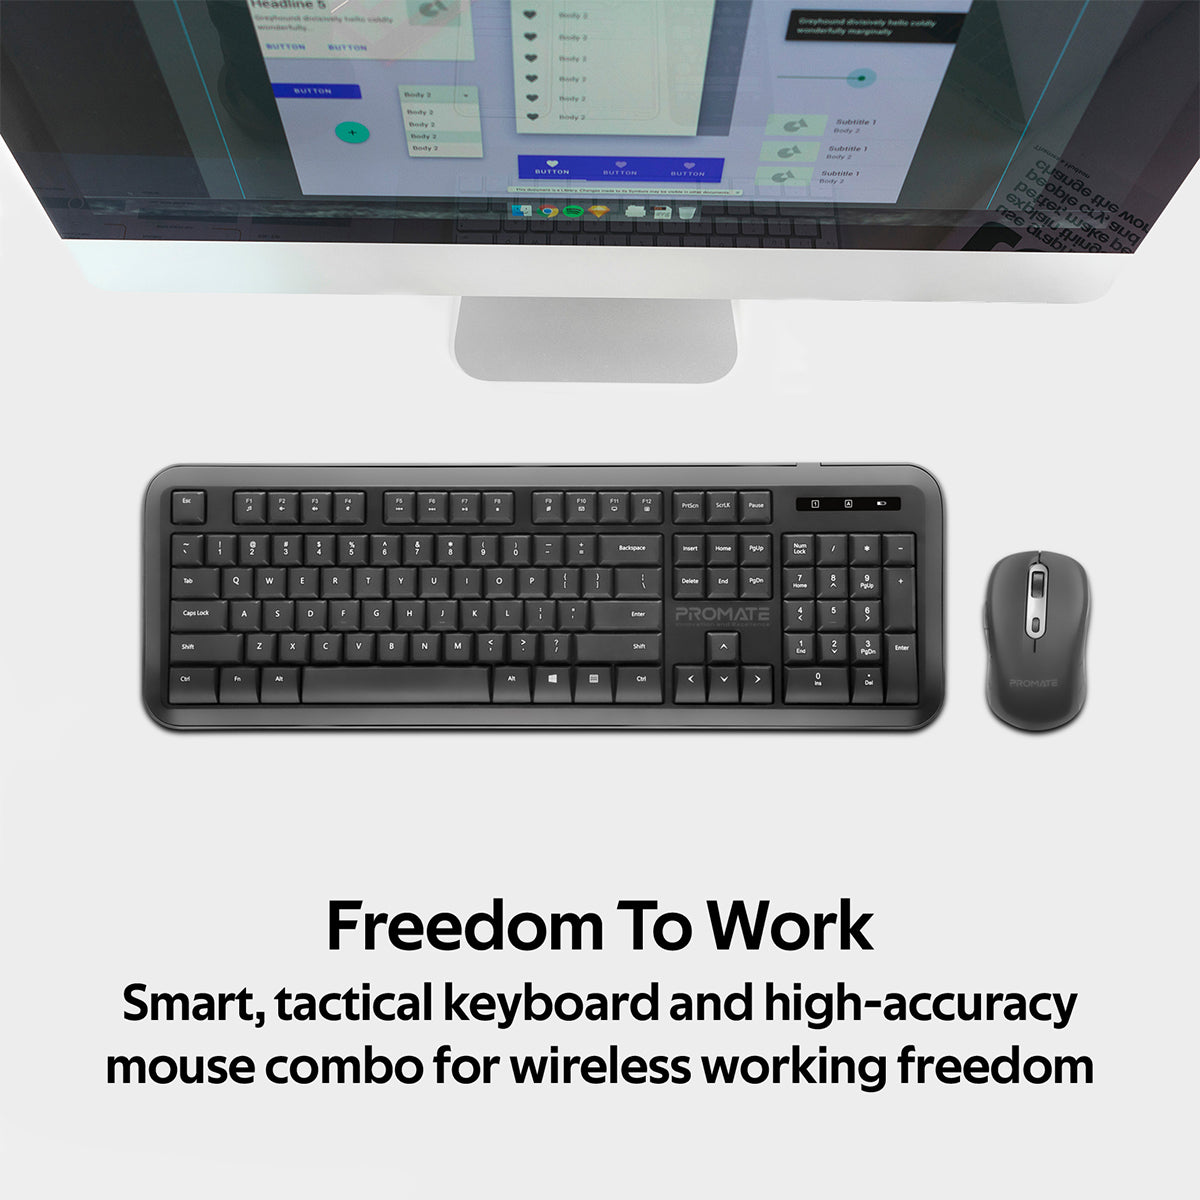 Promate USB-C Wireless Keyboard and Mouse, 2.4Ghz Quiet Full-Size Keyboard and Adjustable DPI Mouse with 2-in-1 USB-A/USB-C Nano Receiver, 12 Multimedia Shortcuts and Auto-Sleep Function for Desktop, PC, Windows, iOS, ProCombo-6 English